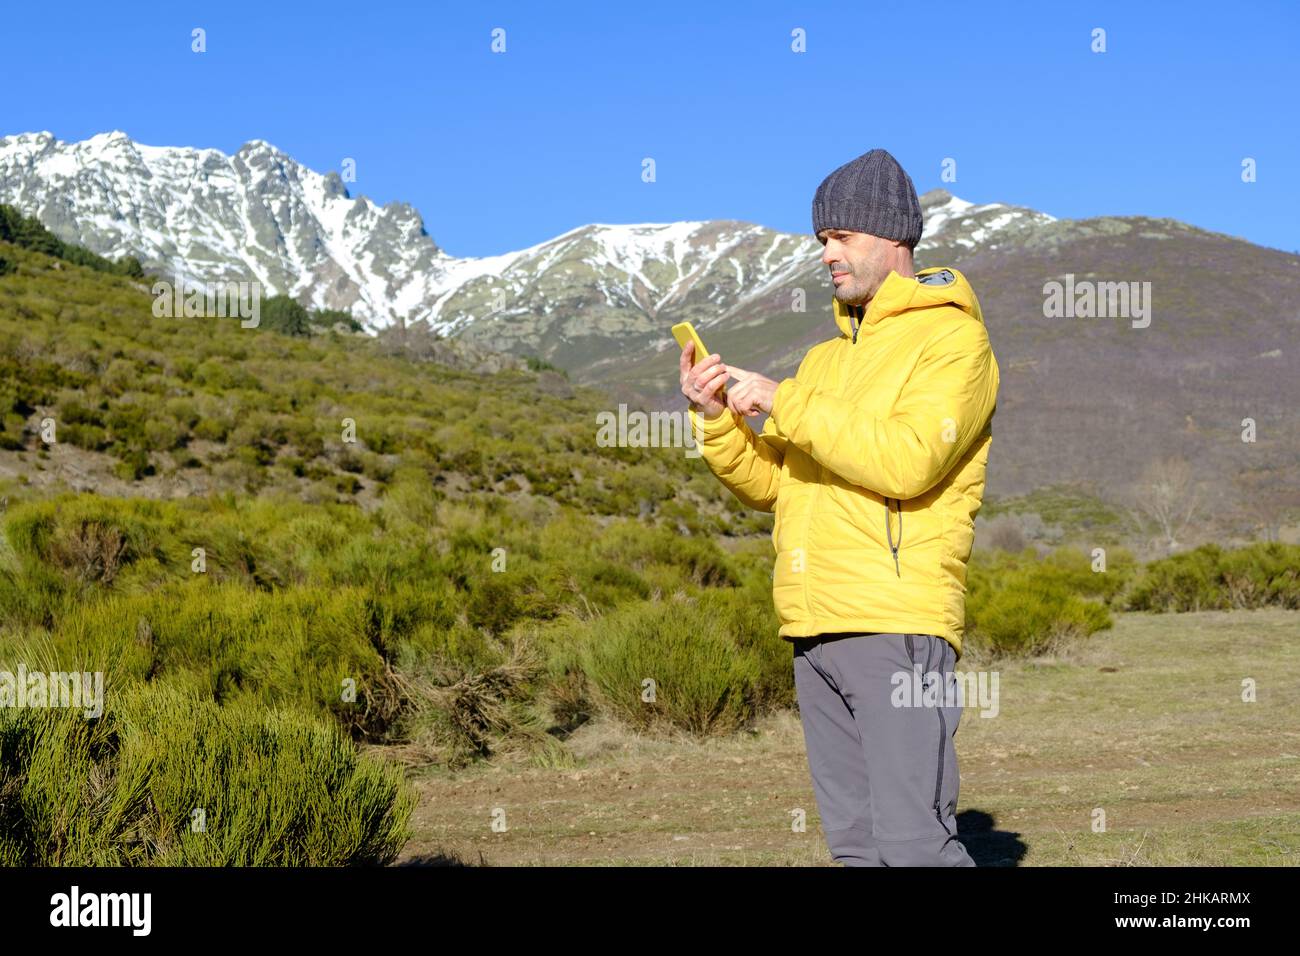 a man uses his smartphone in the wilderness near snow-capped mountains Stock Photo